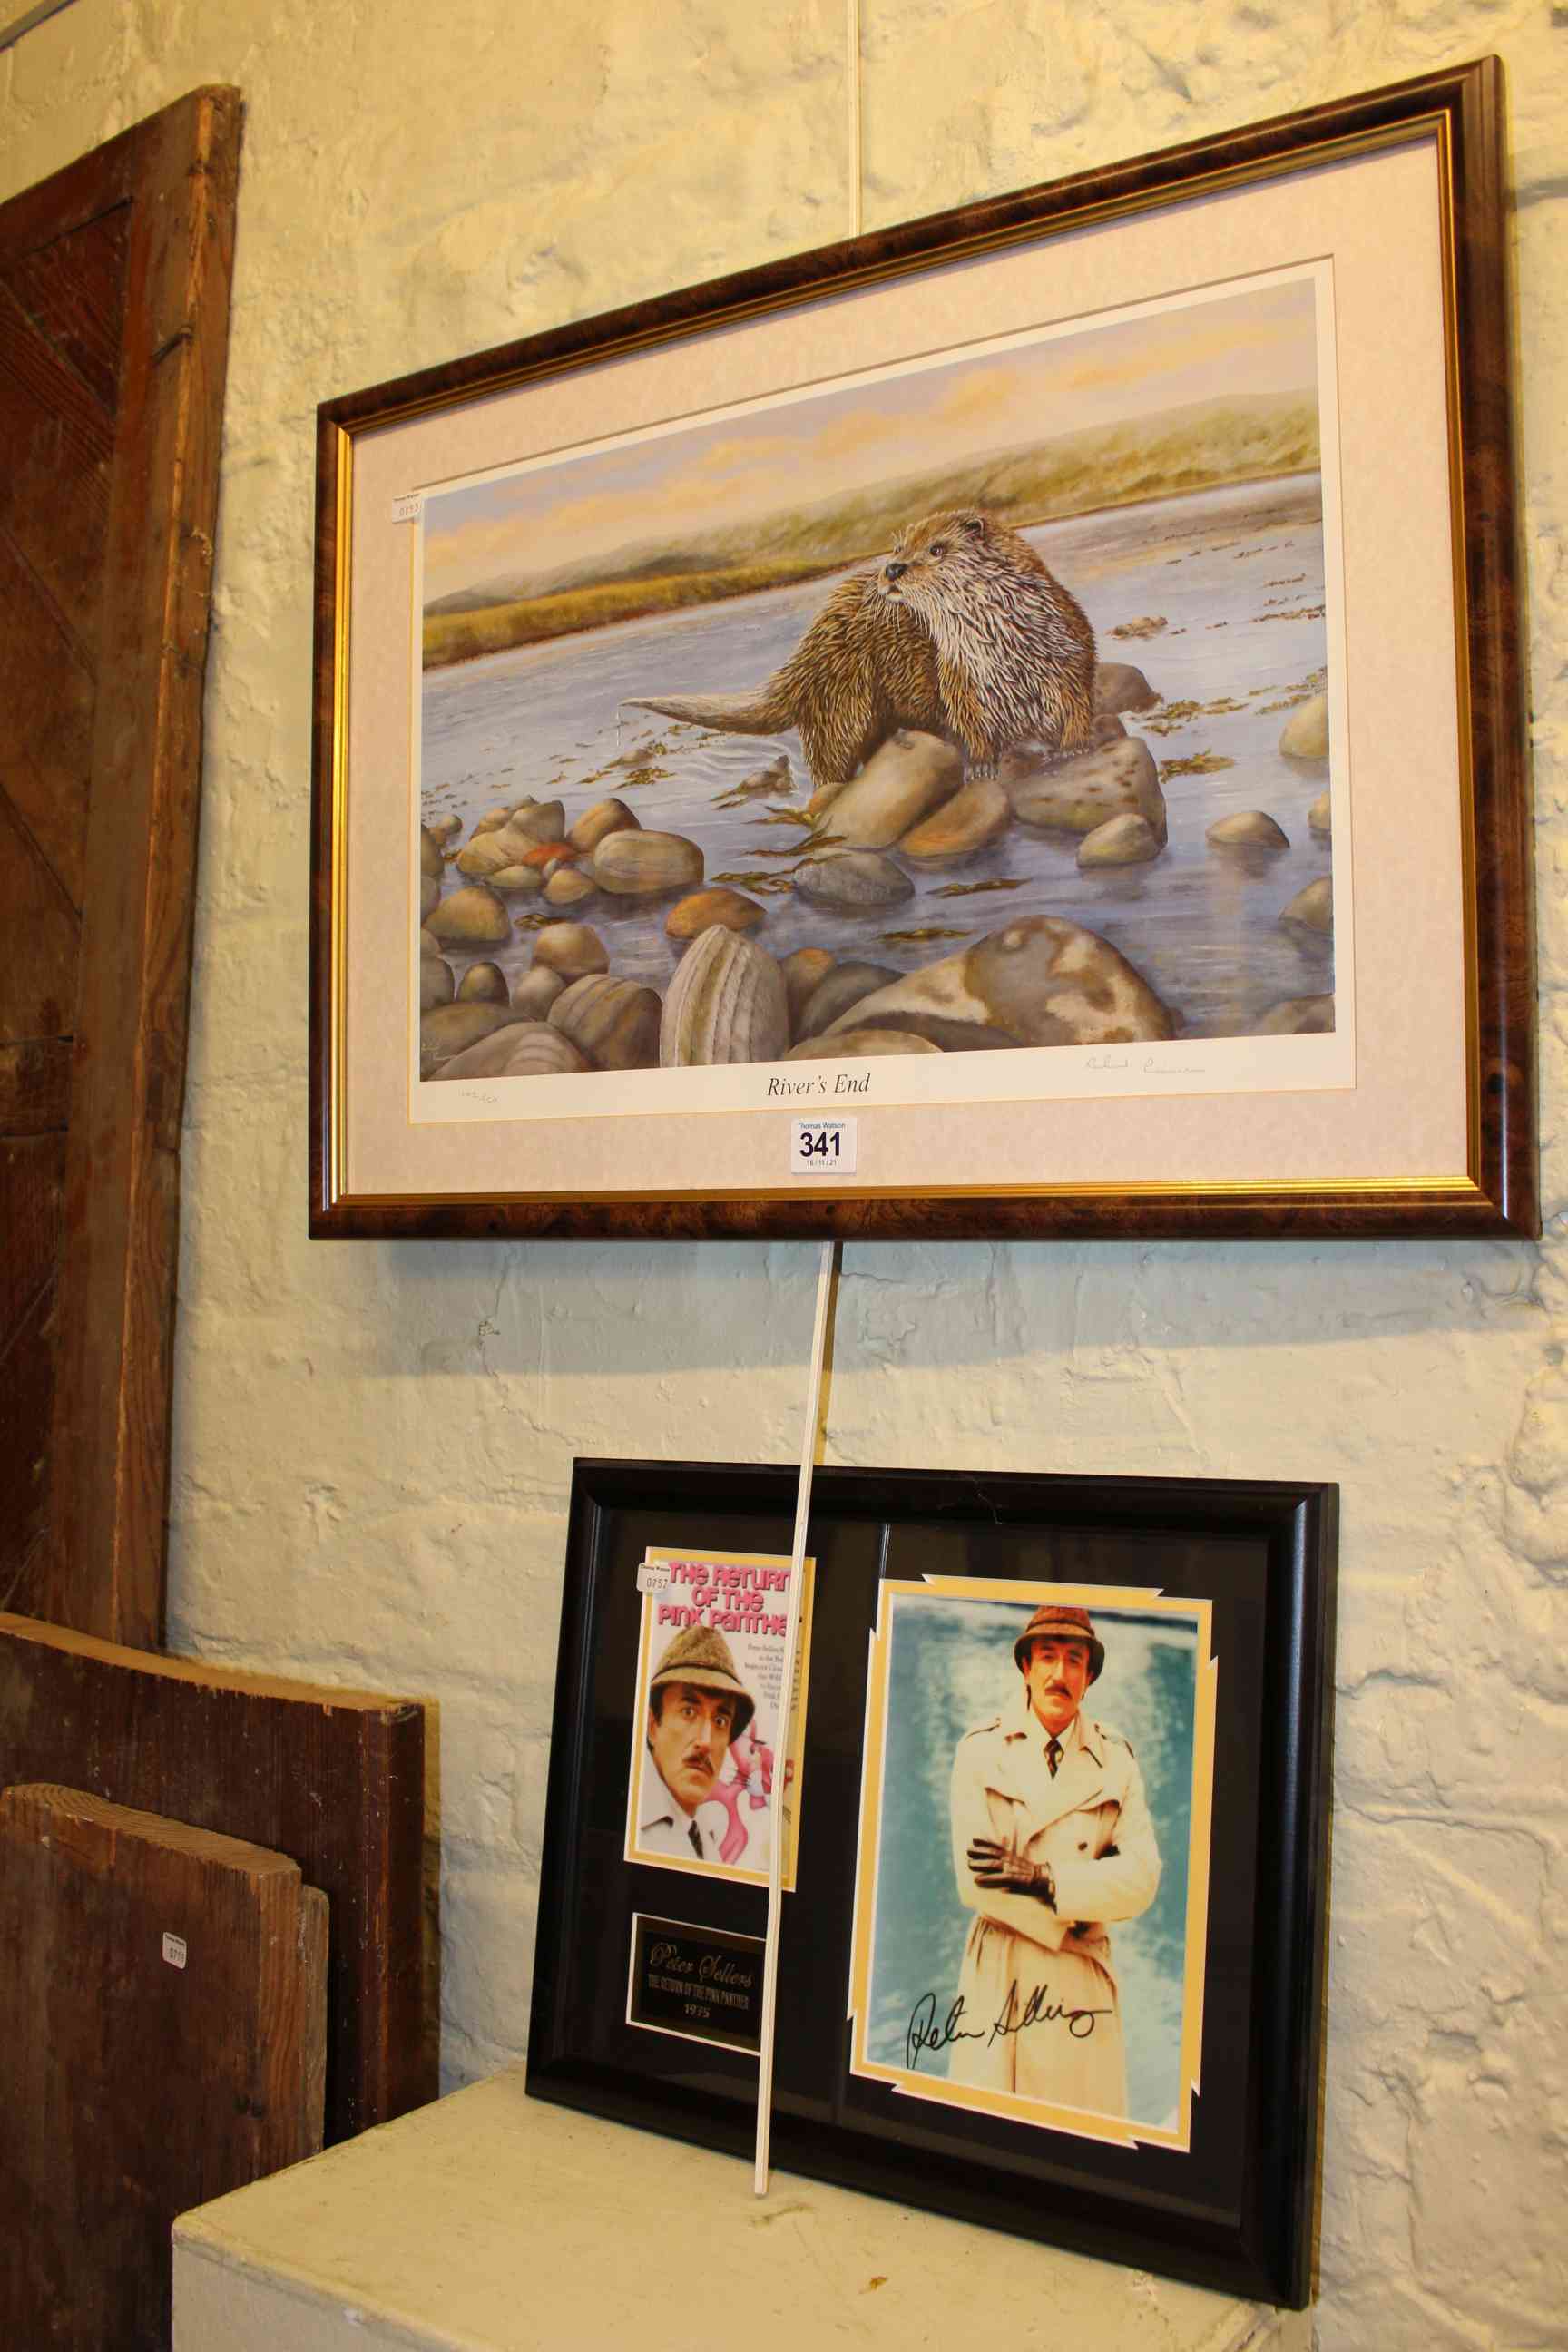 Peter Sellers, Pink Panther, framed film memorabilia and Rivers End limited edition print (2).